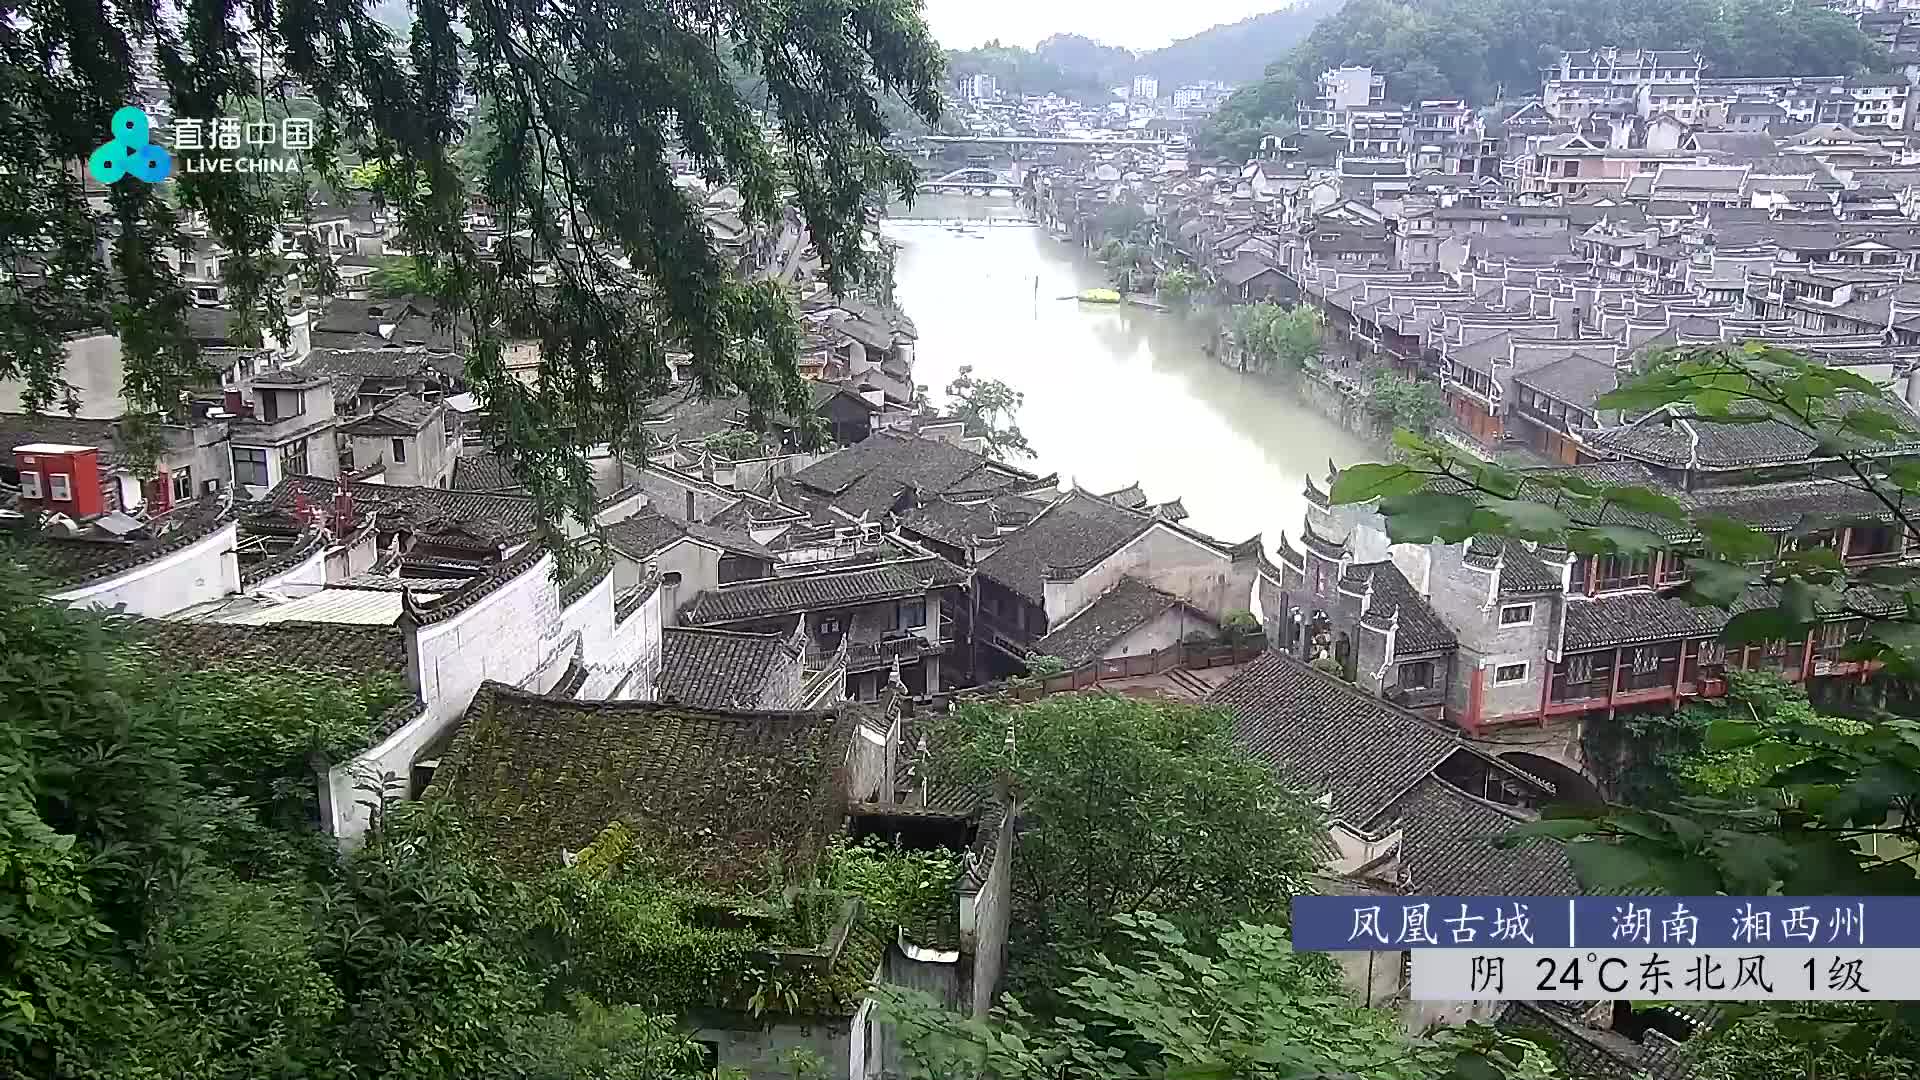 Fenghuang Dom. 07:48